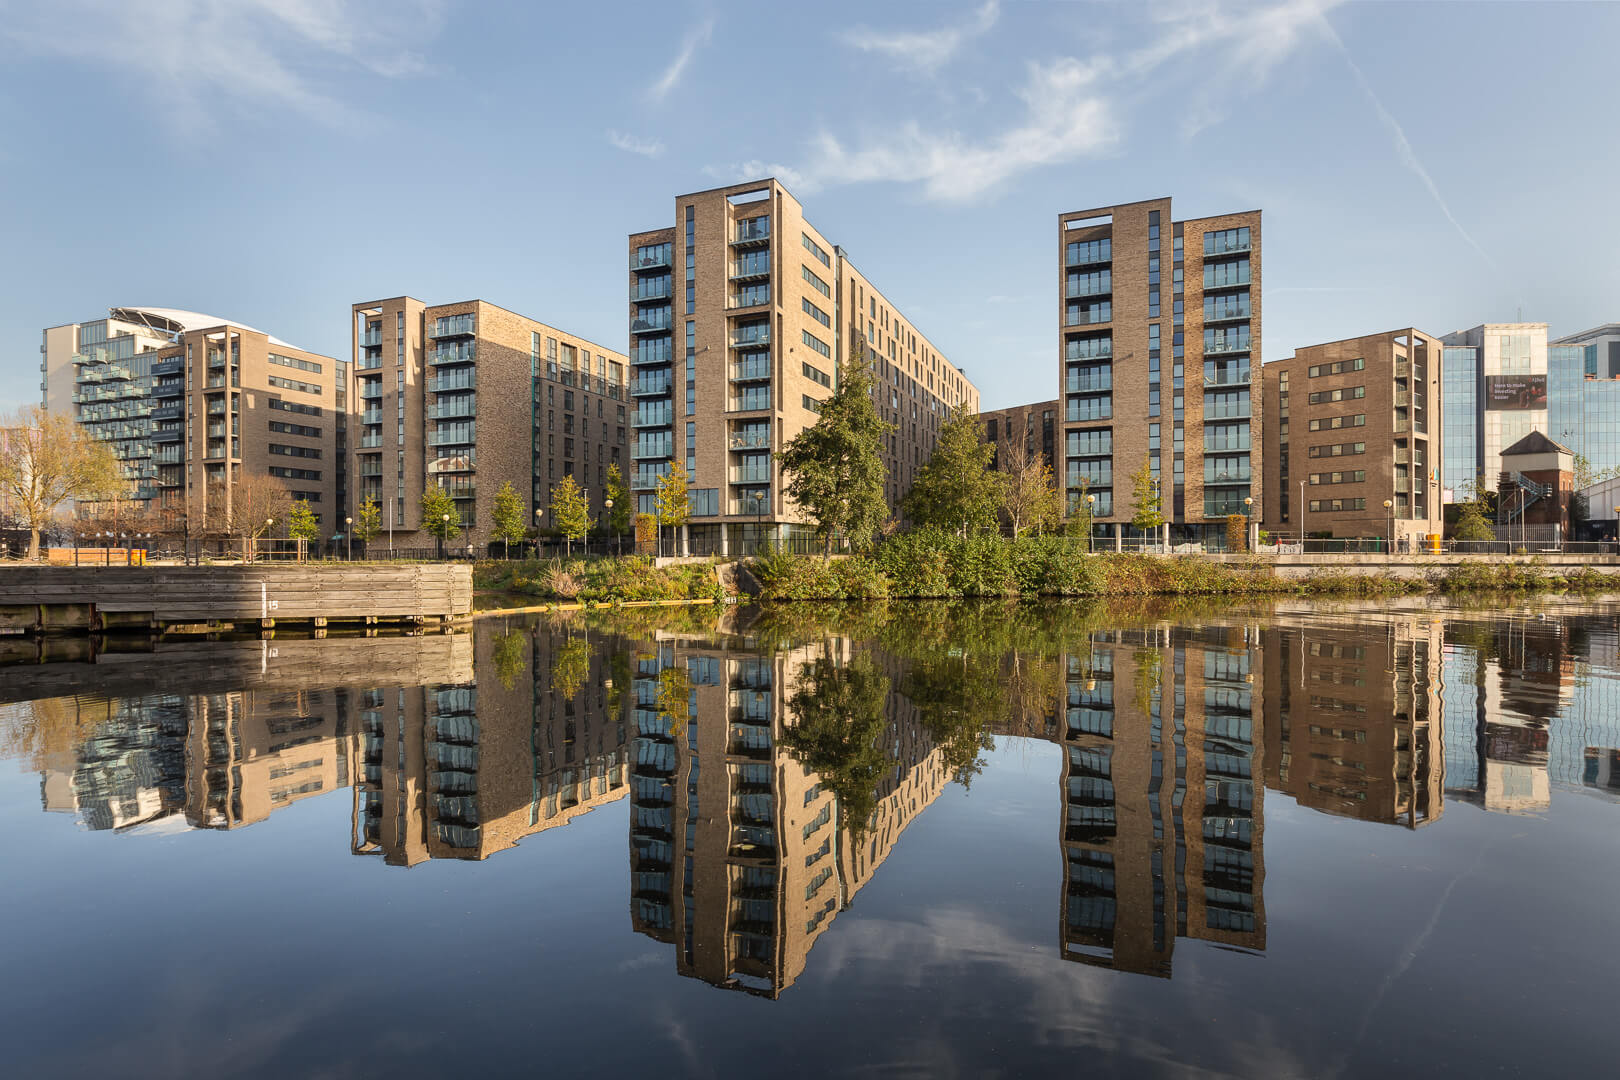 Architectural photography - Clippers Quay, Salford, Greater Manchester - Completed residential construction development